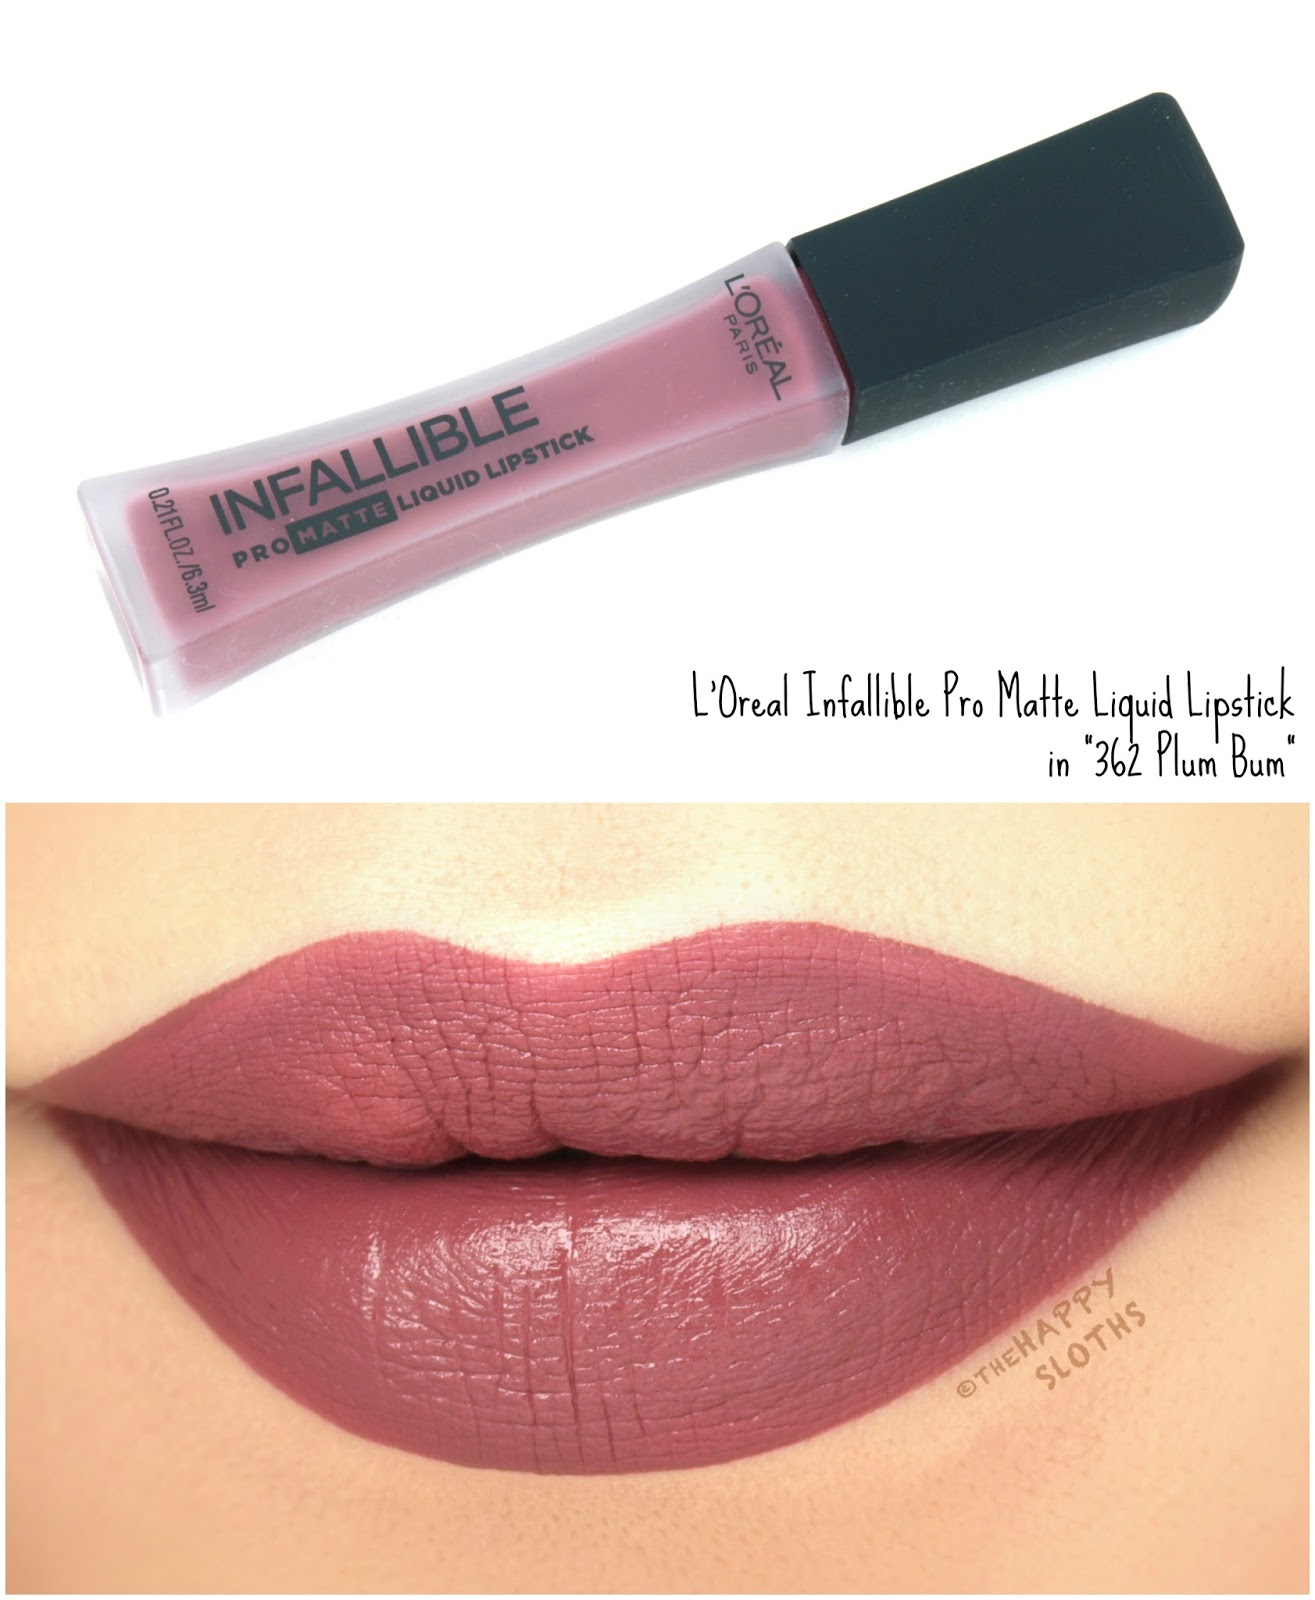 L'Oreal Infallible Pro Matte Liquid Lipsticks in "362 Plum Bum": Review and Swatches